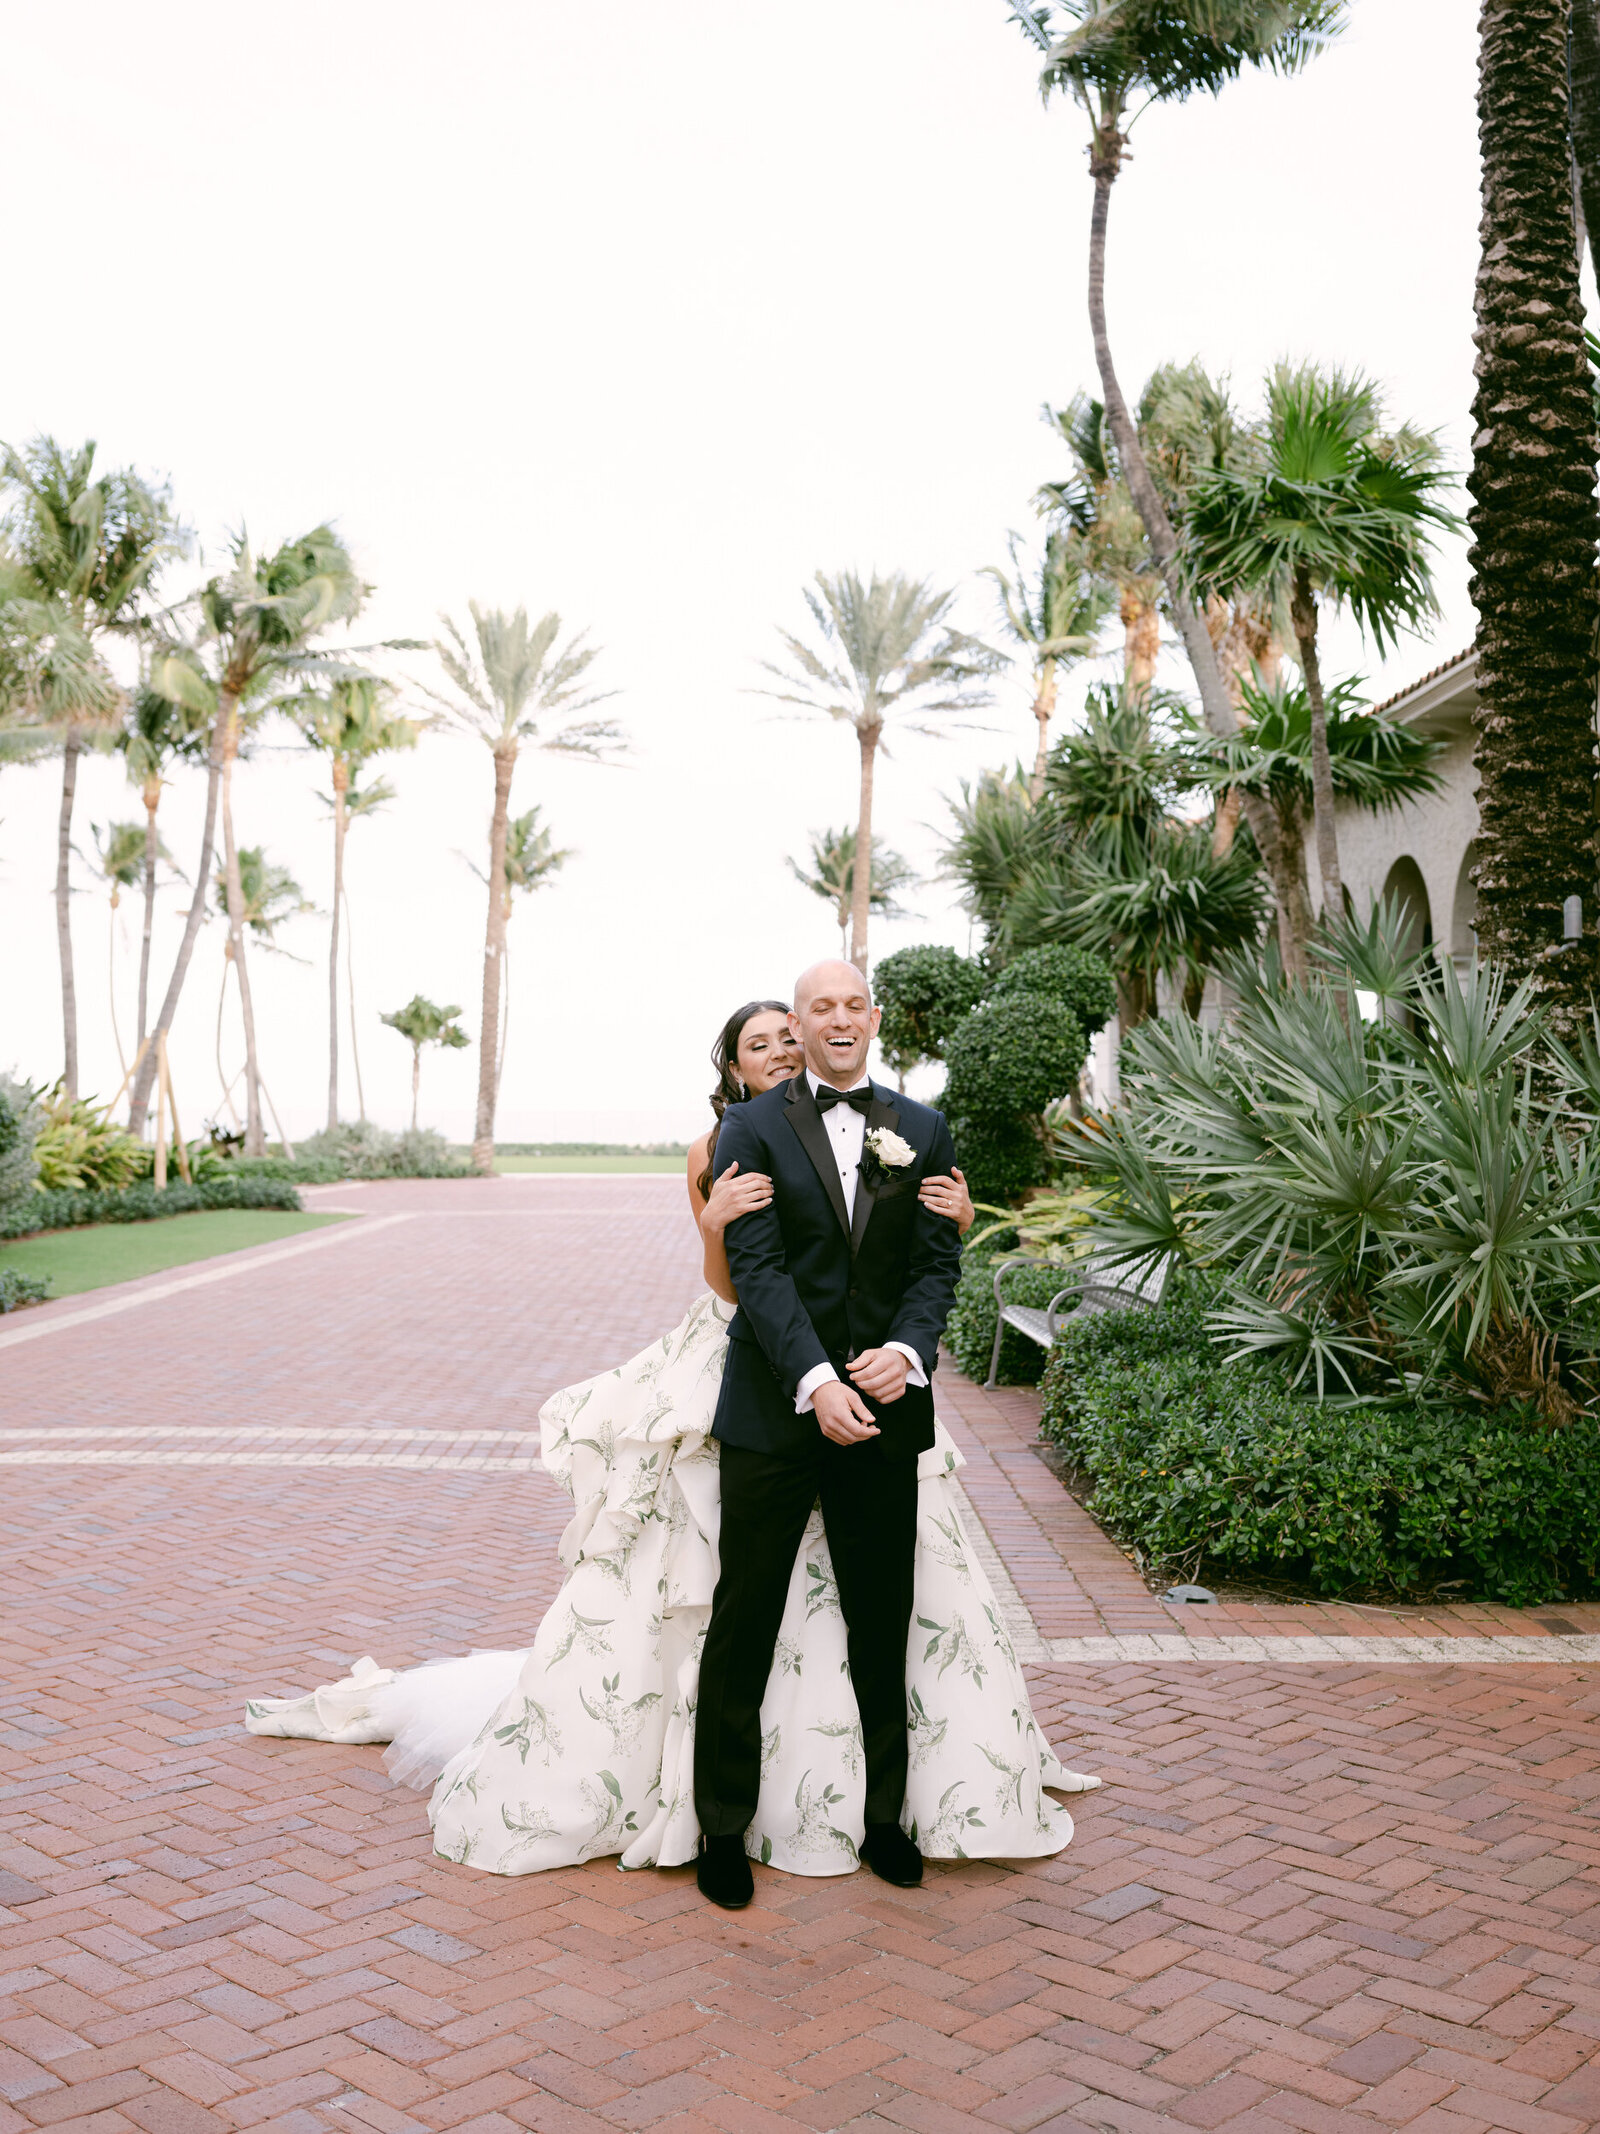 the-breakers-palm-beach-monique-lhuillier-bride-guerdy-design-renny-and-reed-the-new-york-times-BAZAAR-brides-Little-Black-Book-harpers-BAZAAR-A-Top-Wedding-Photographer-in-the-World-judith-rae-0310